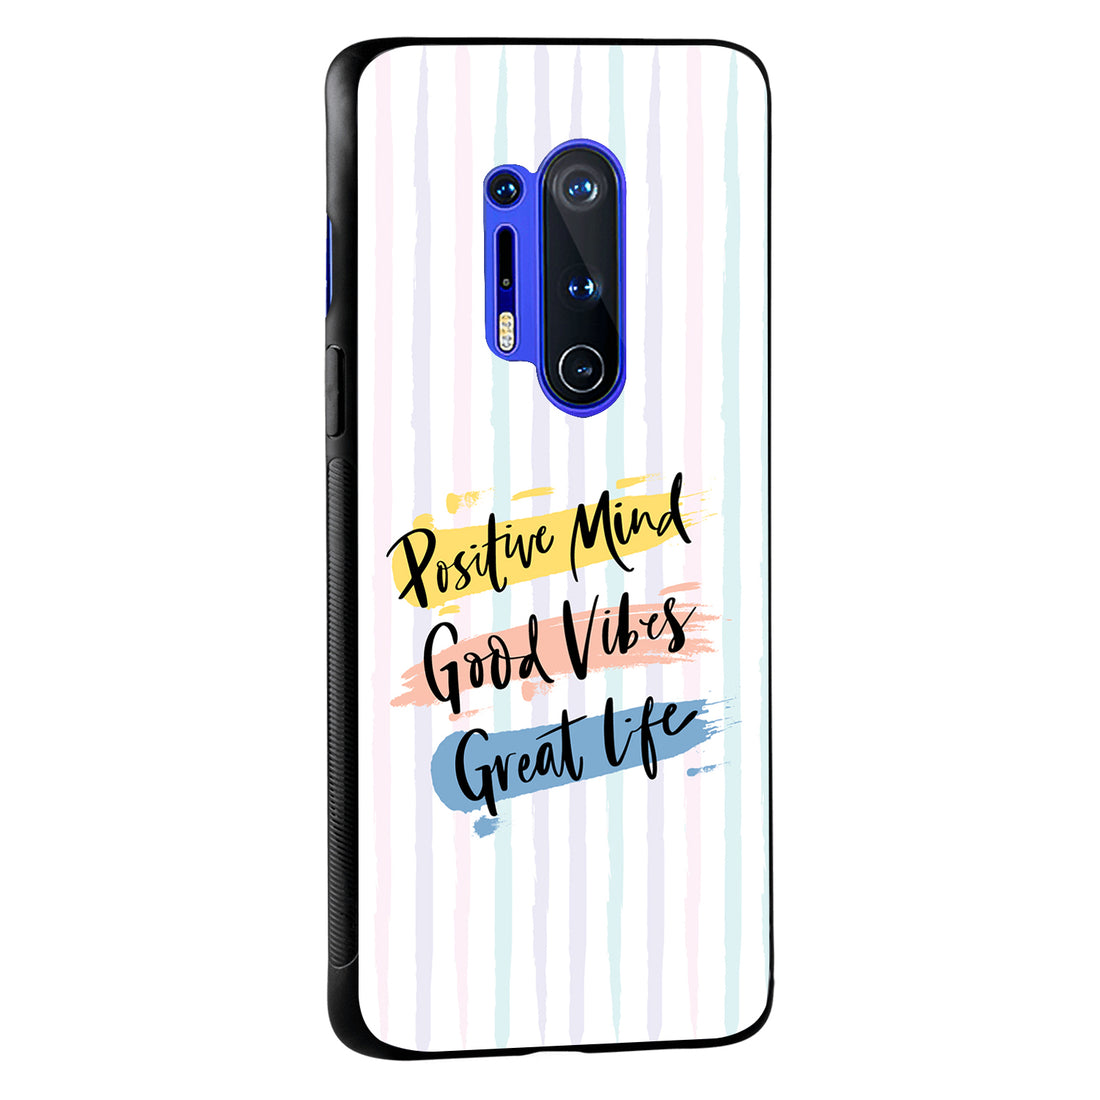 Great Life Motivational Quotes OnePlus 8 Pro Back Case